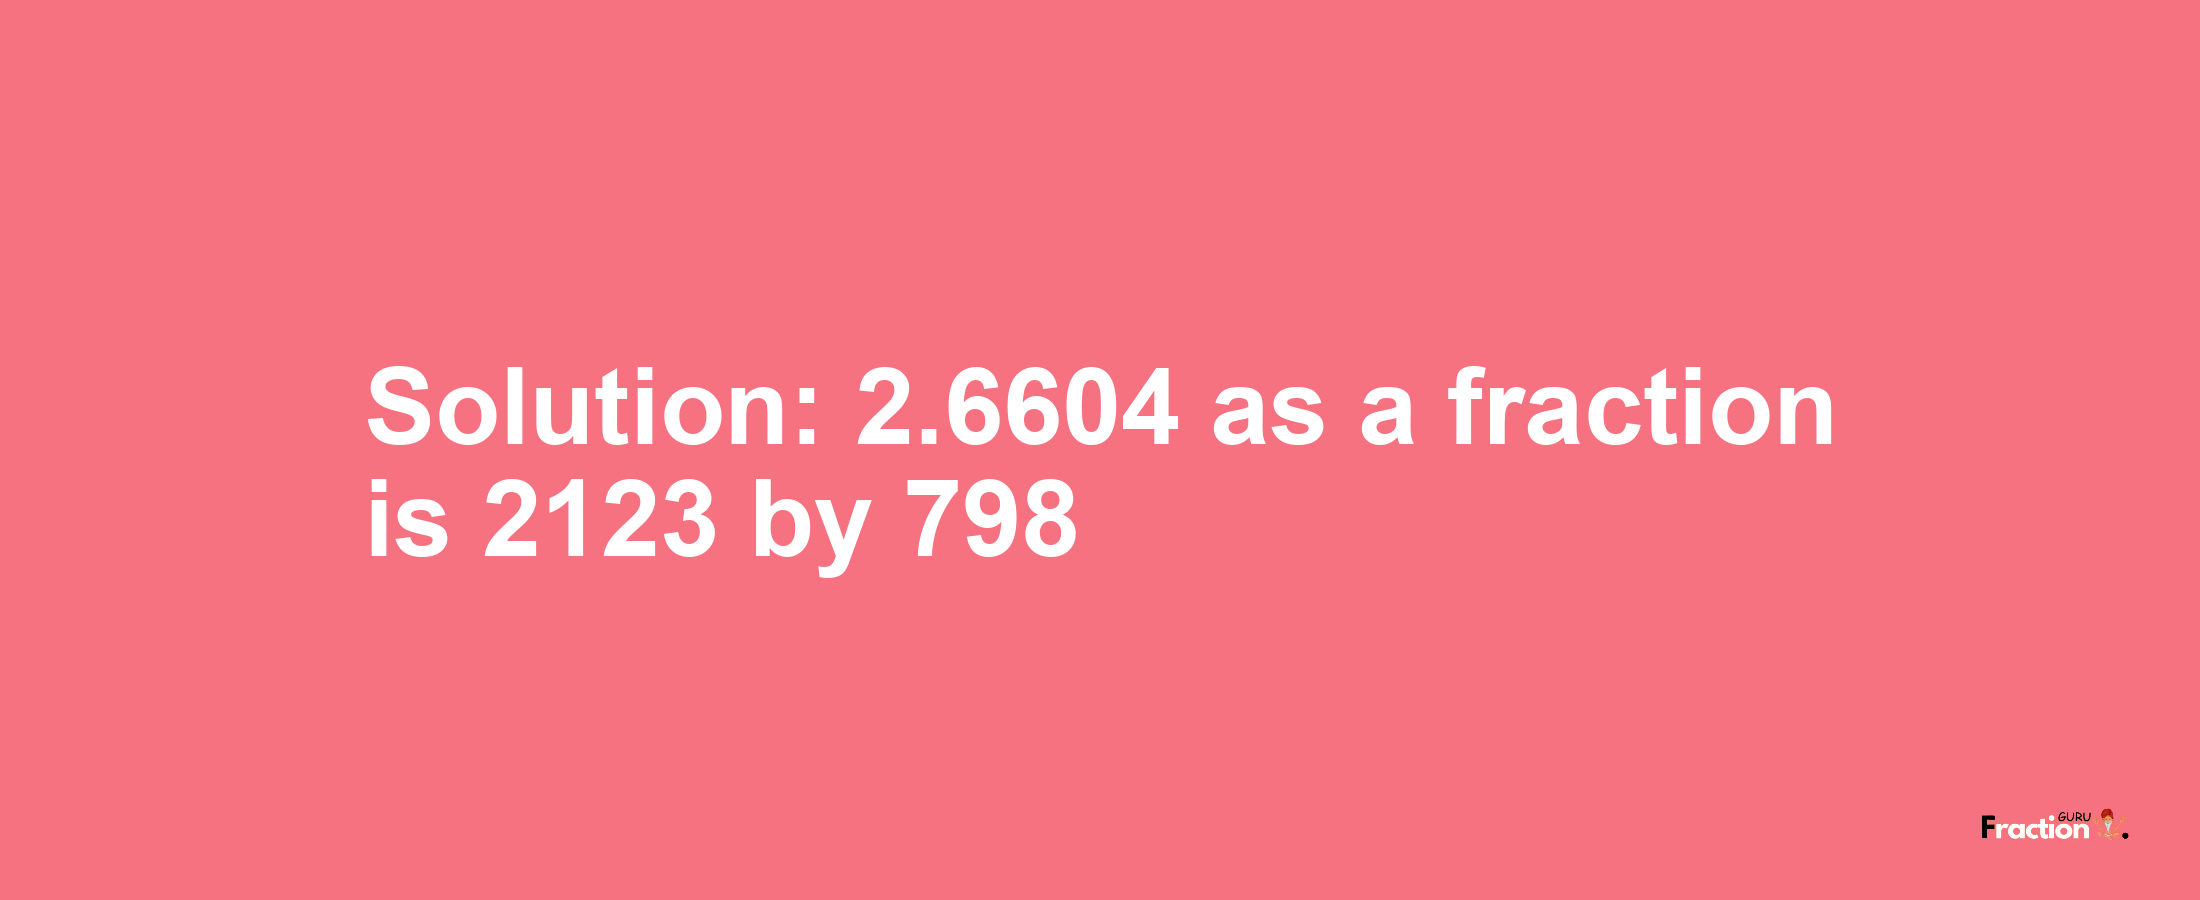 Solution:2.6604 as a fraction is 2123/798